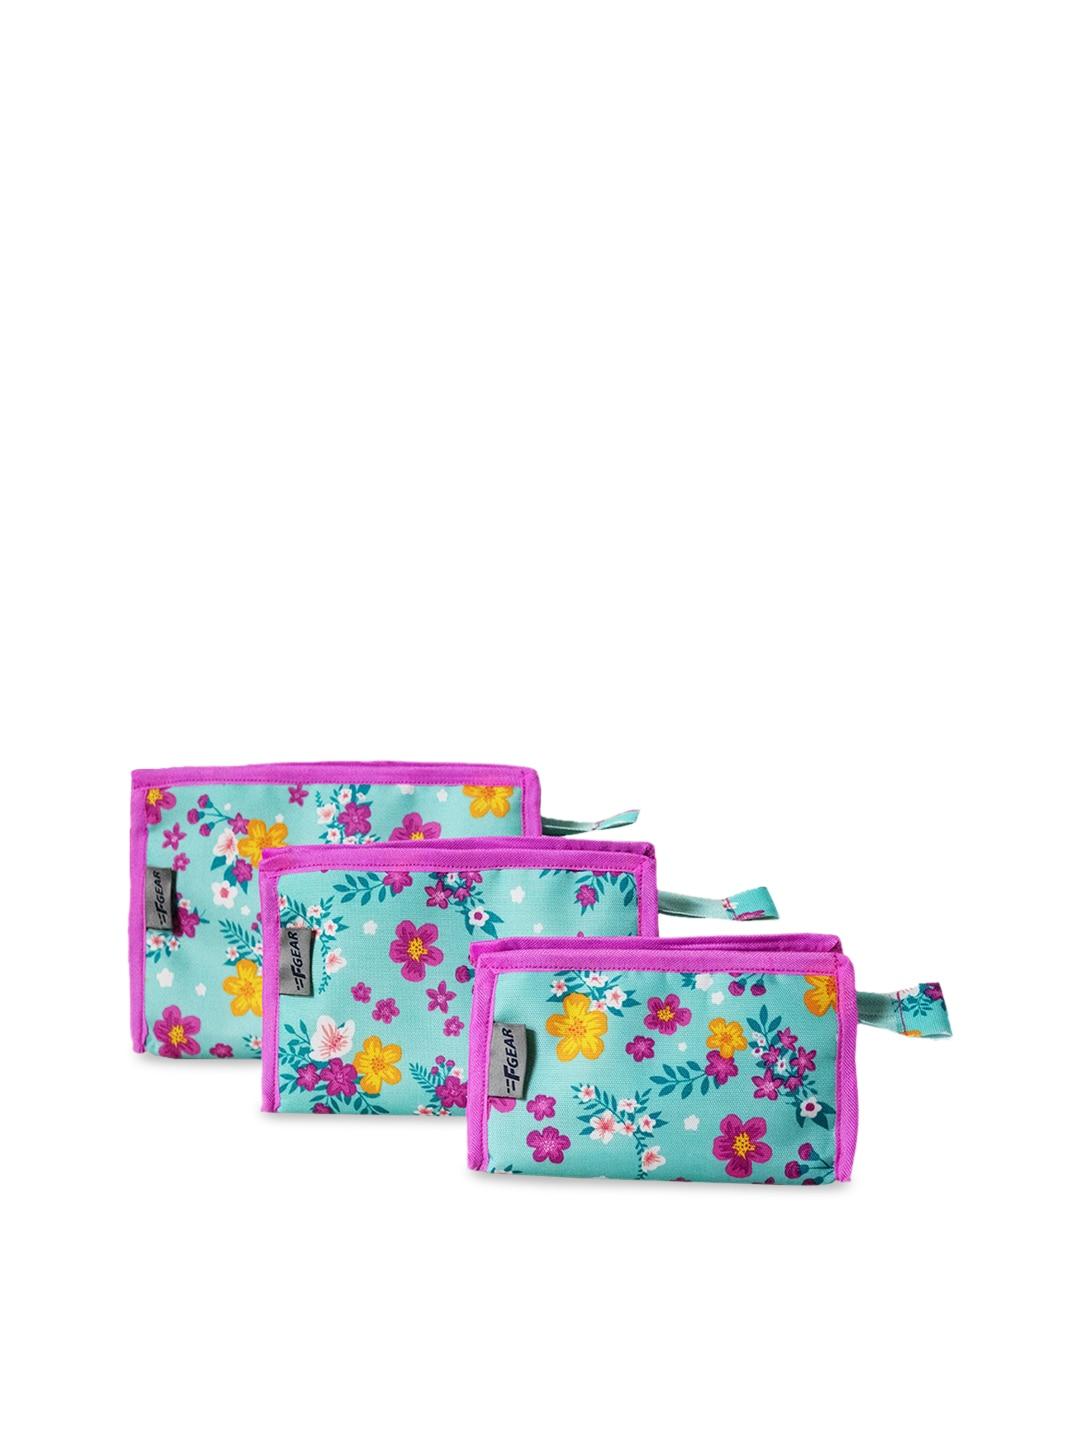 f gear unisex set of 3 turquoise blue & yellow printed travel pouch